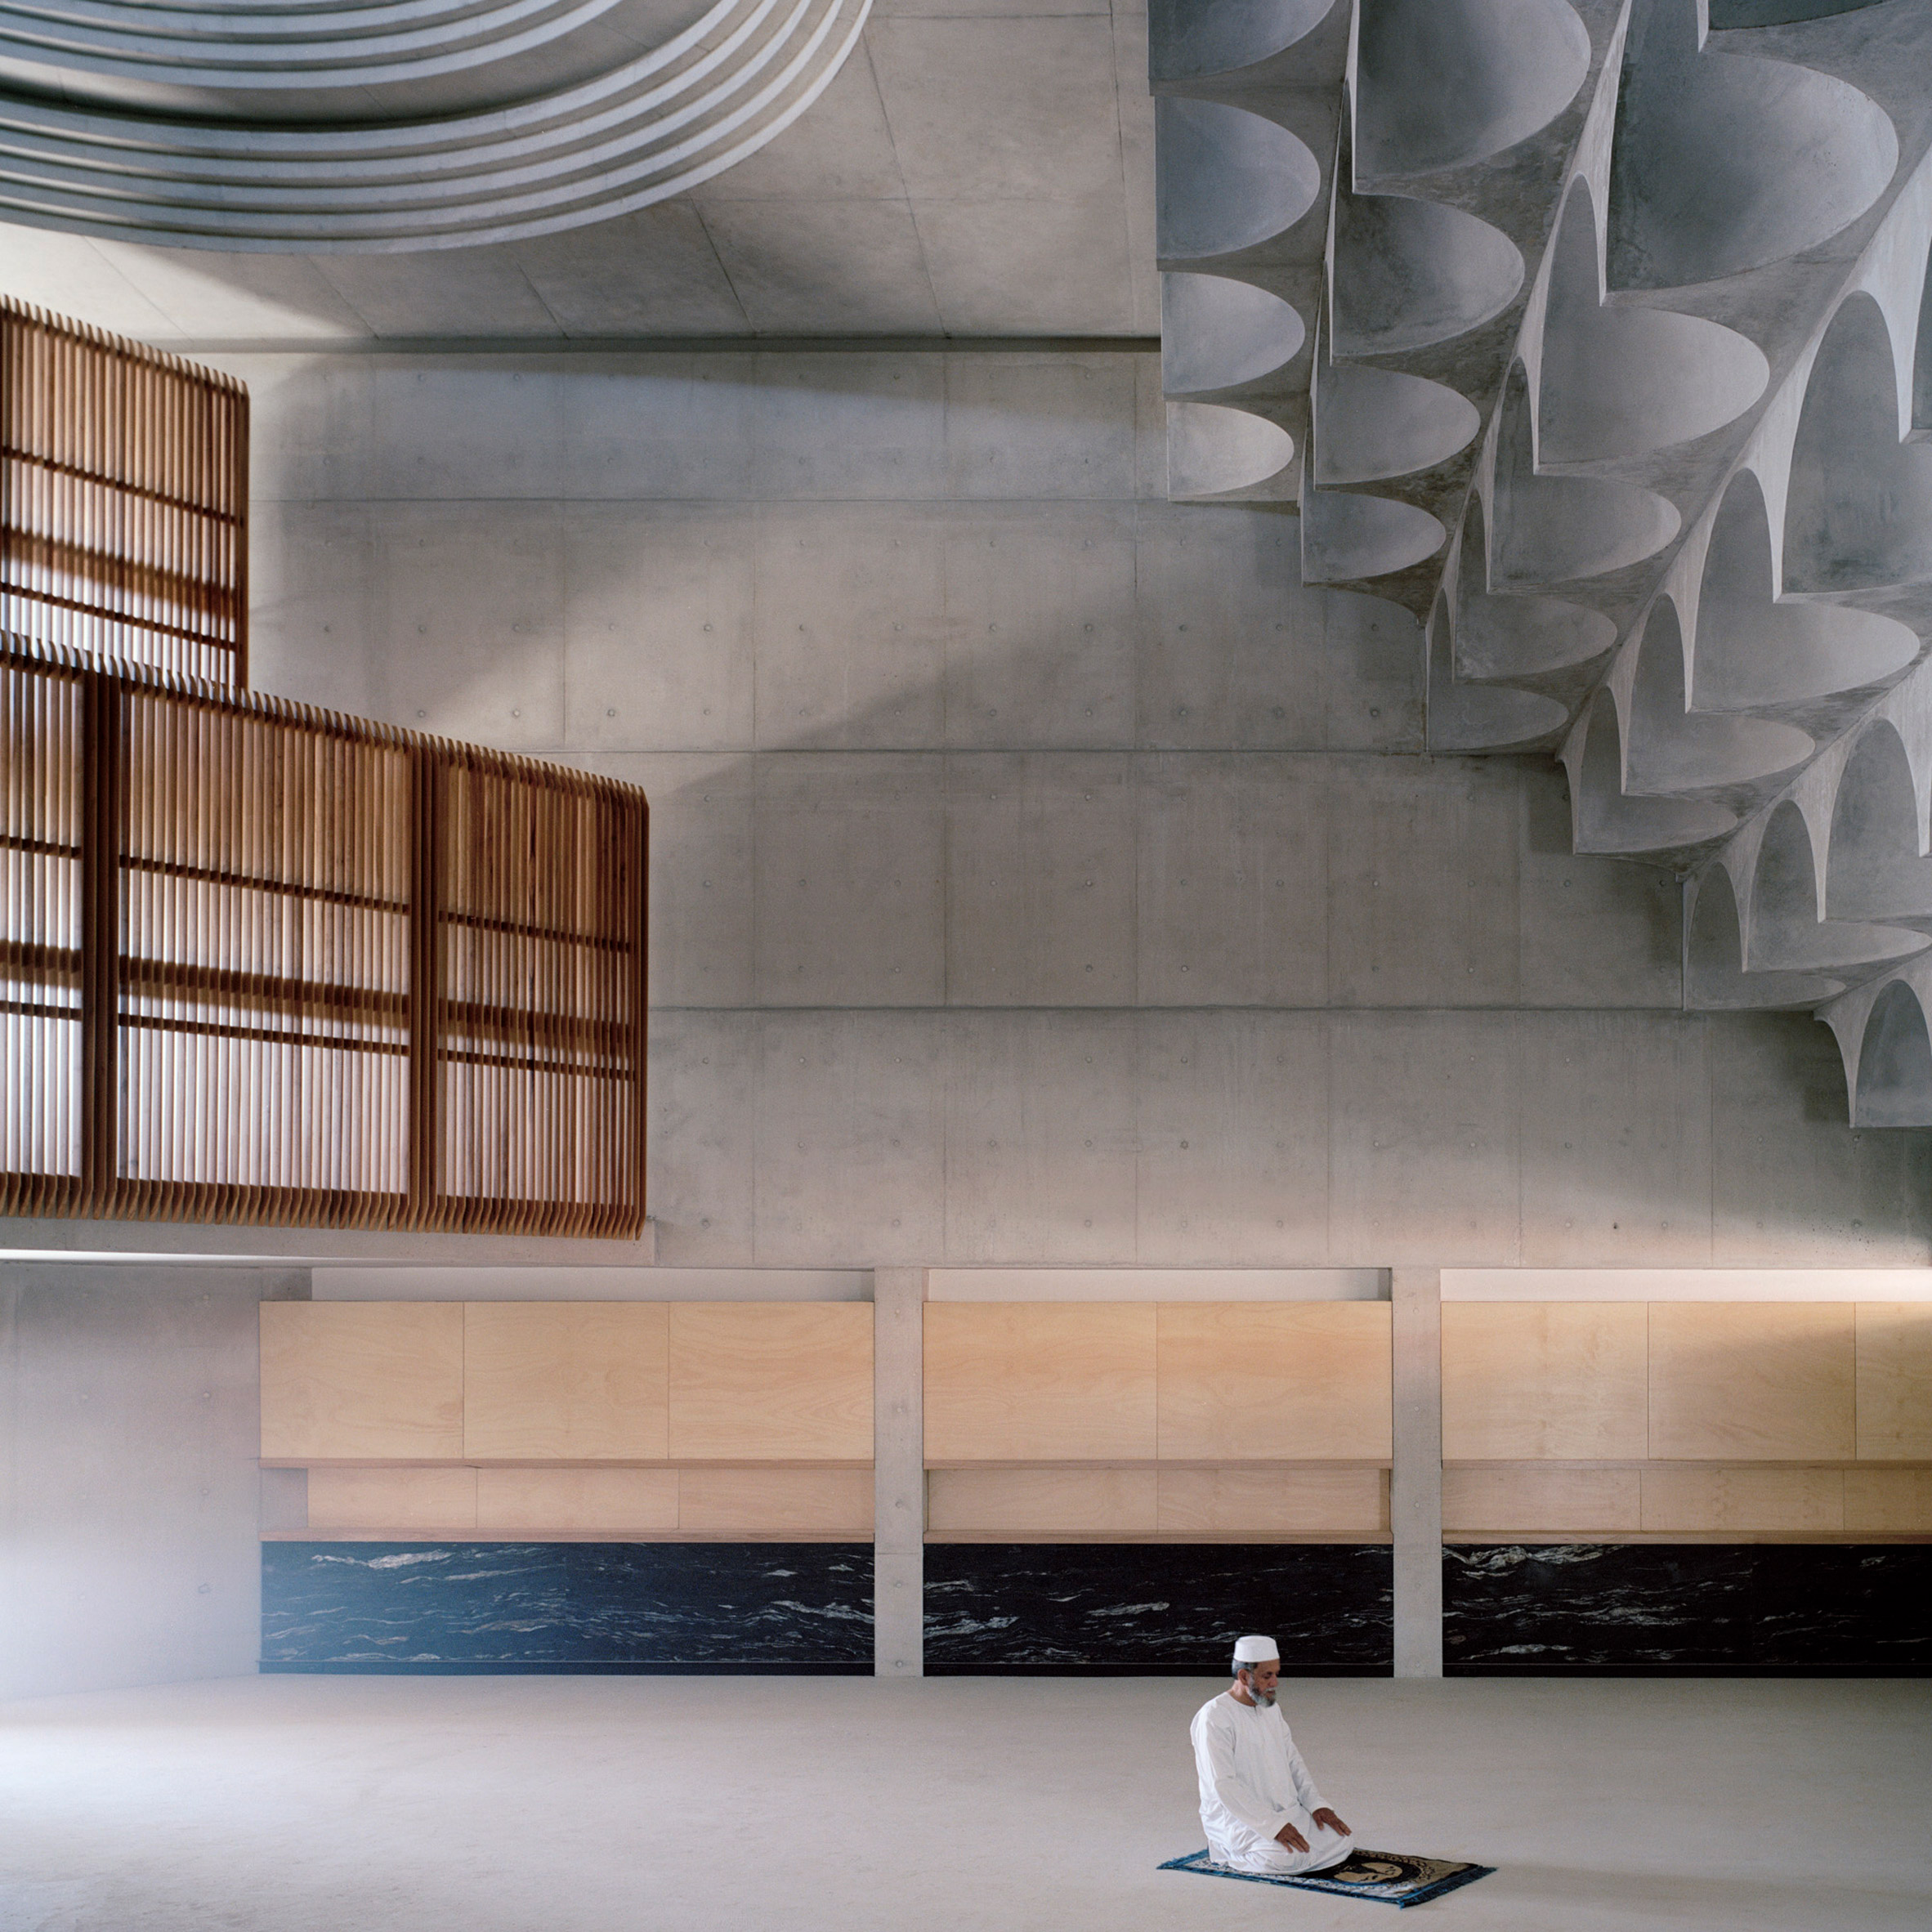 Punchbowl Mosque by Candalepas Associates